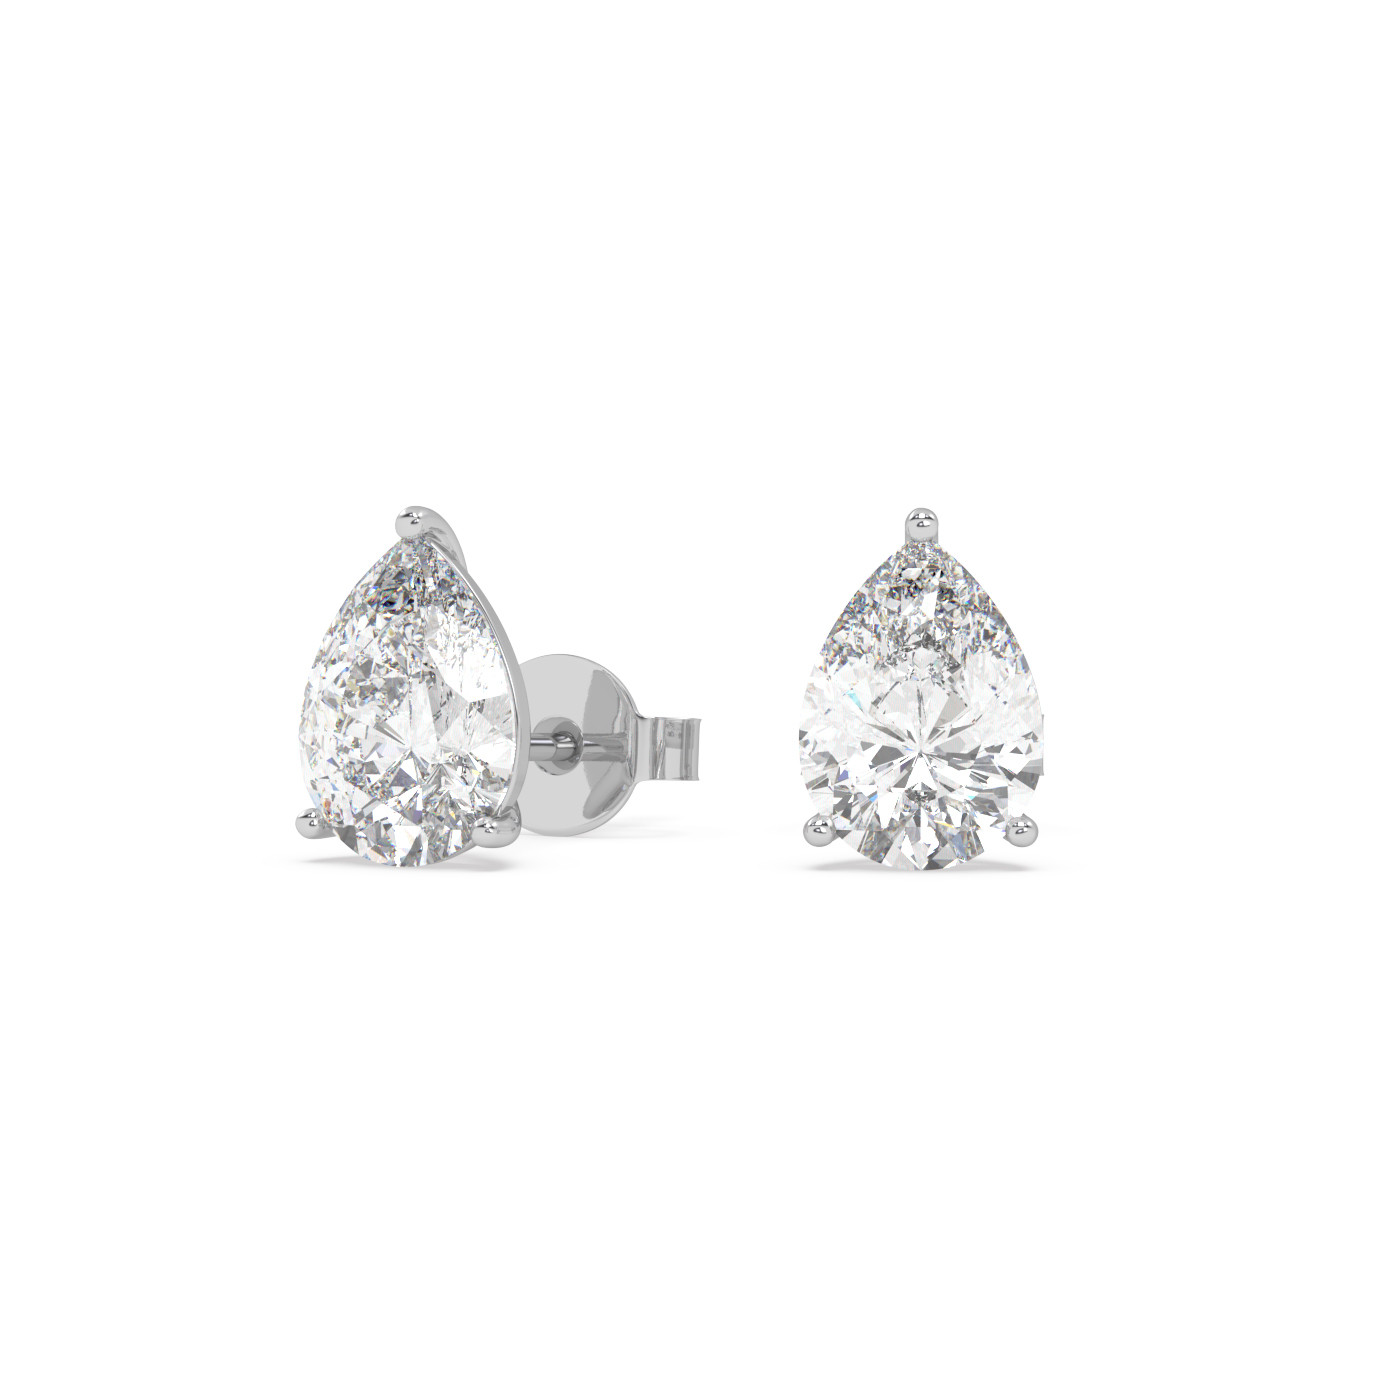 18k white gold 3.5 carat pear stud earrings with butterfly back Photos & images